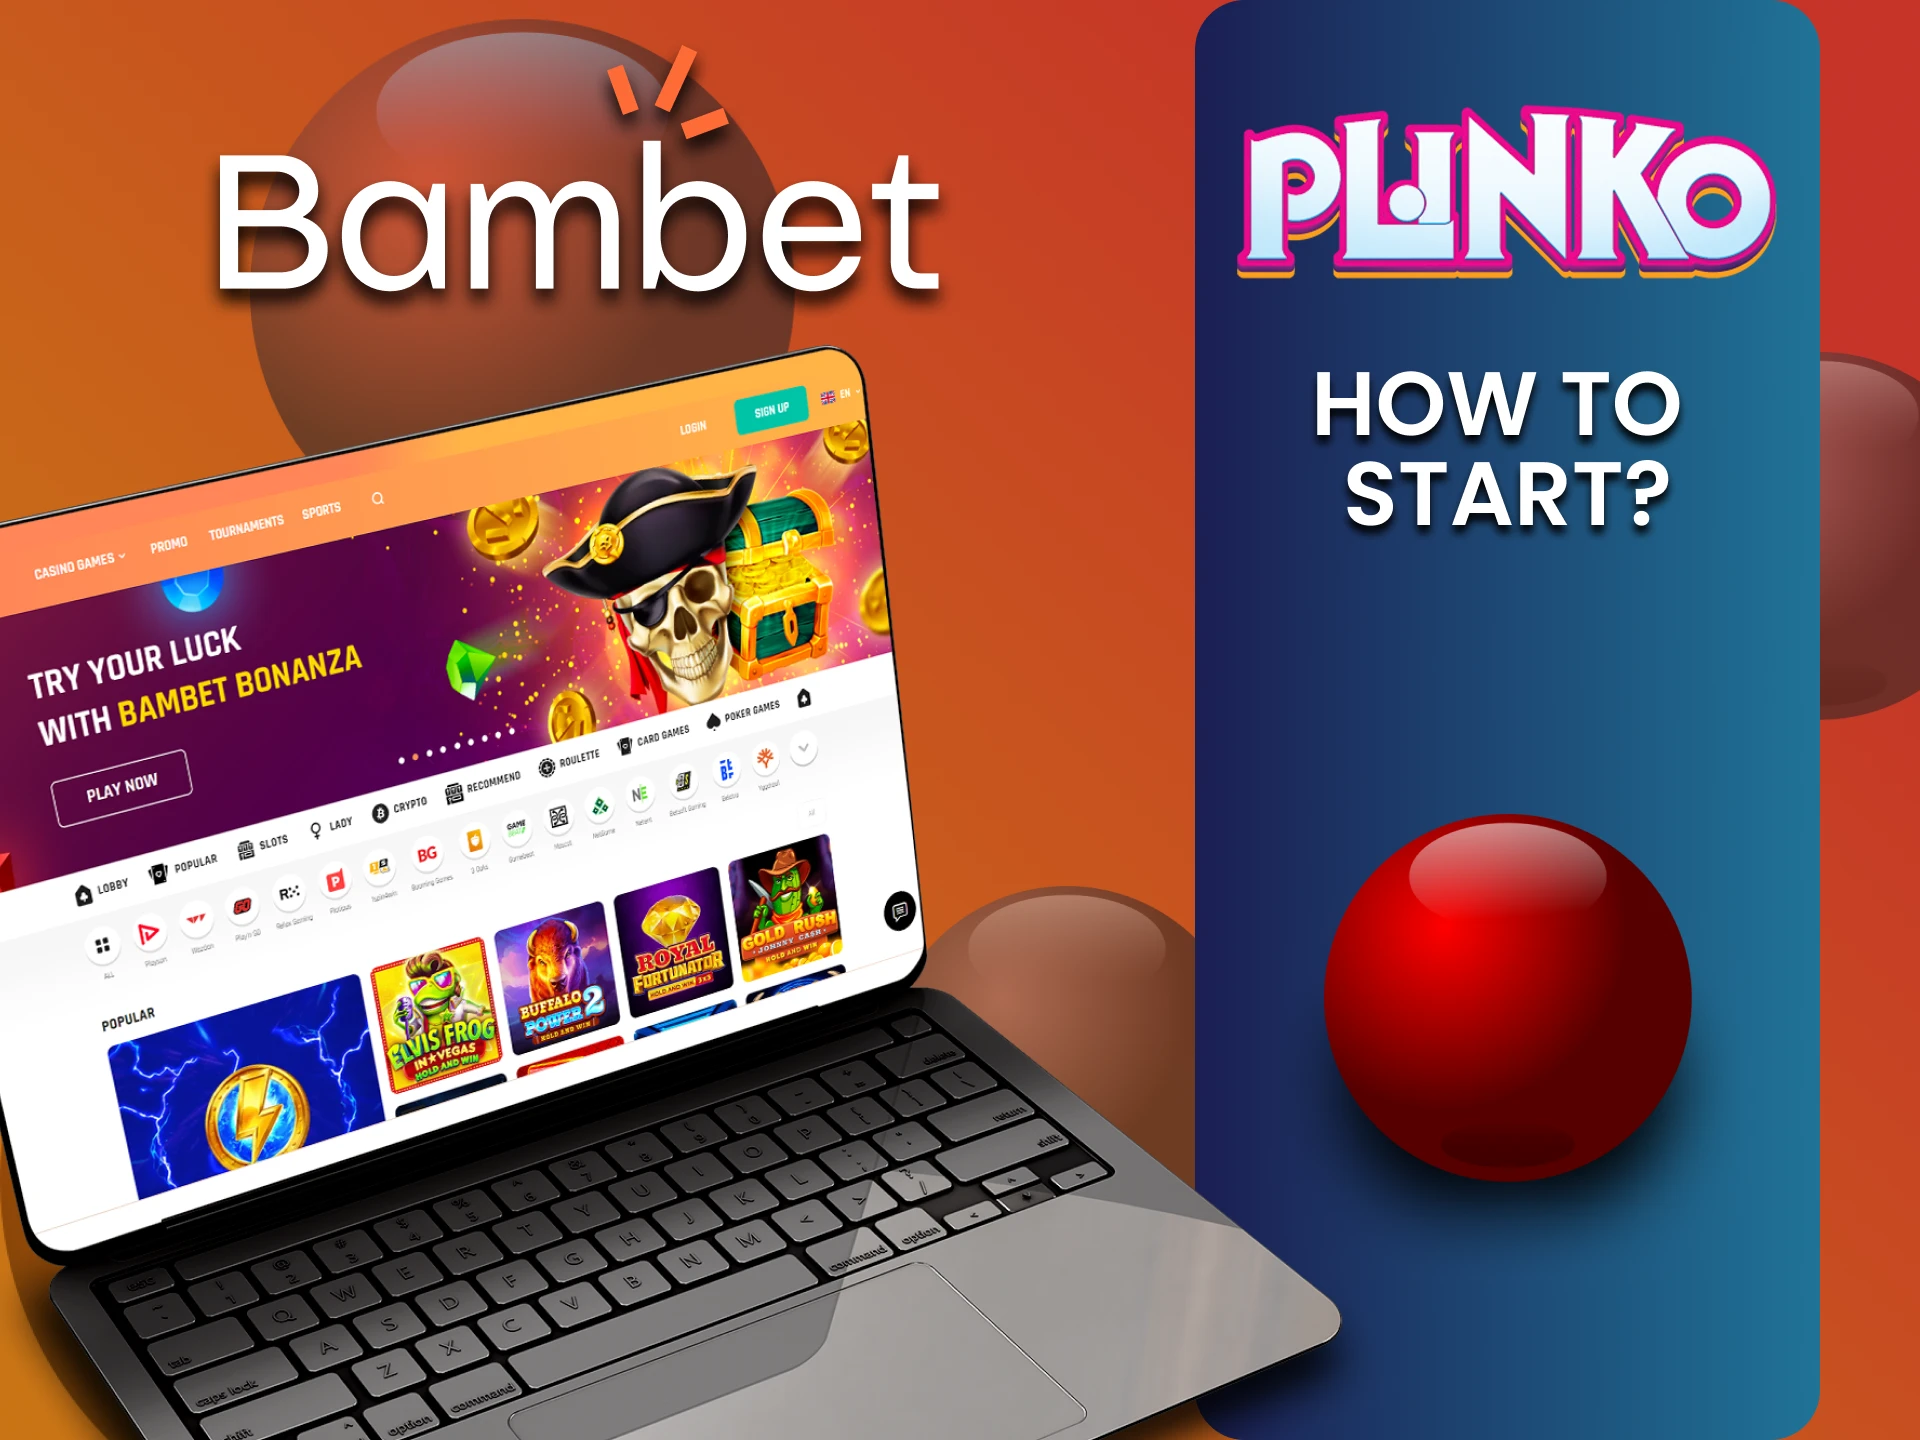 Select the desired section in Bambet for Plinko.